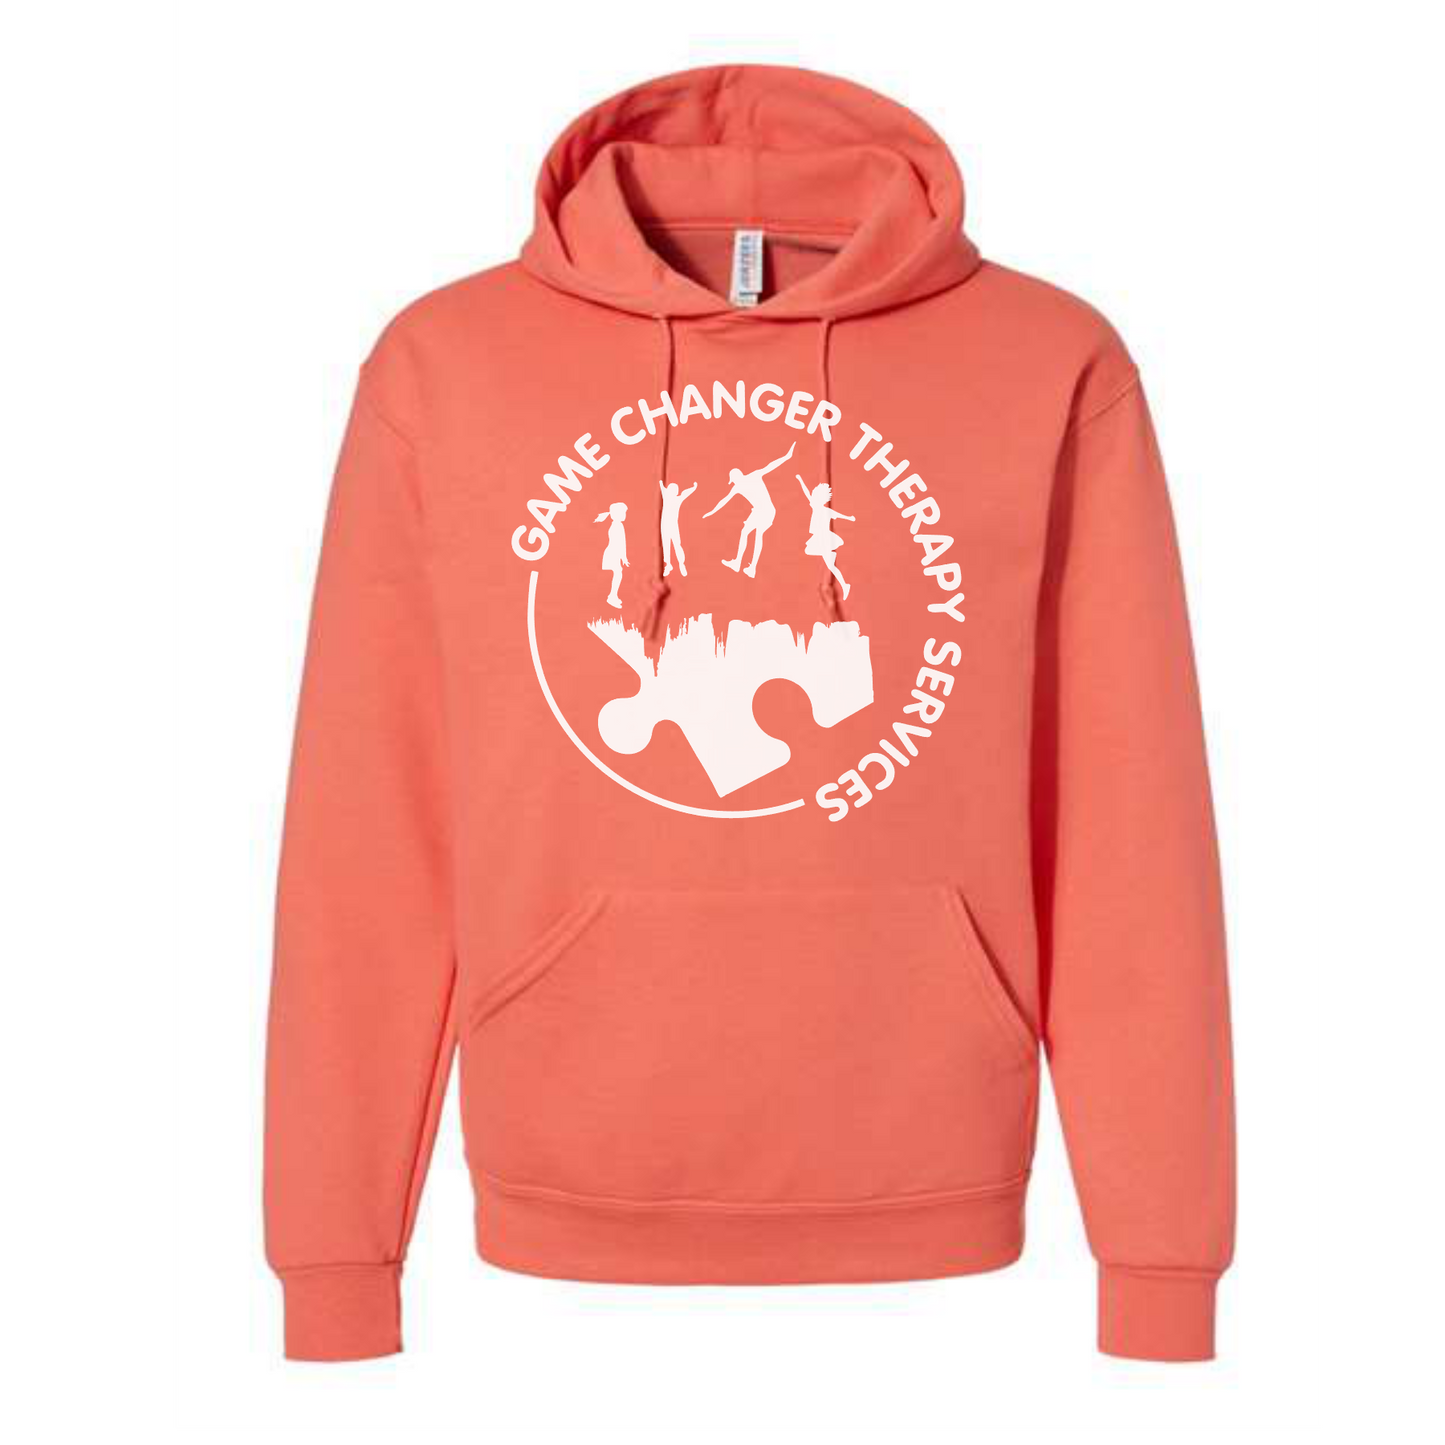 Game Changer Therapy Services - Jerzees Hooded Sweatshirt